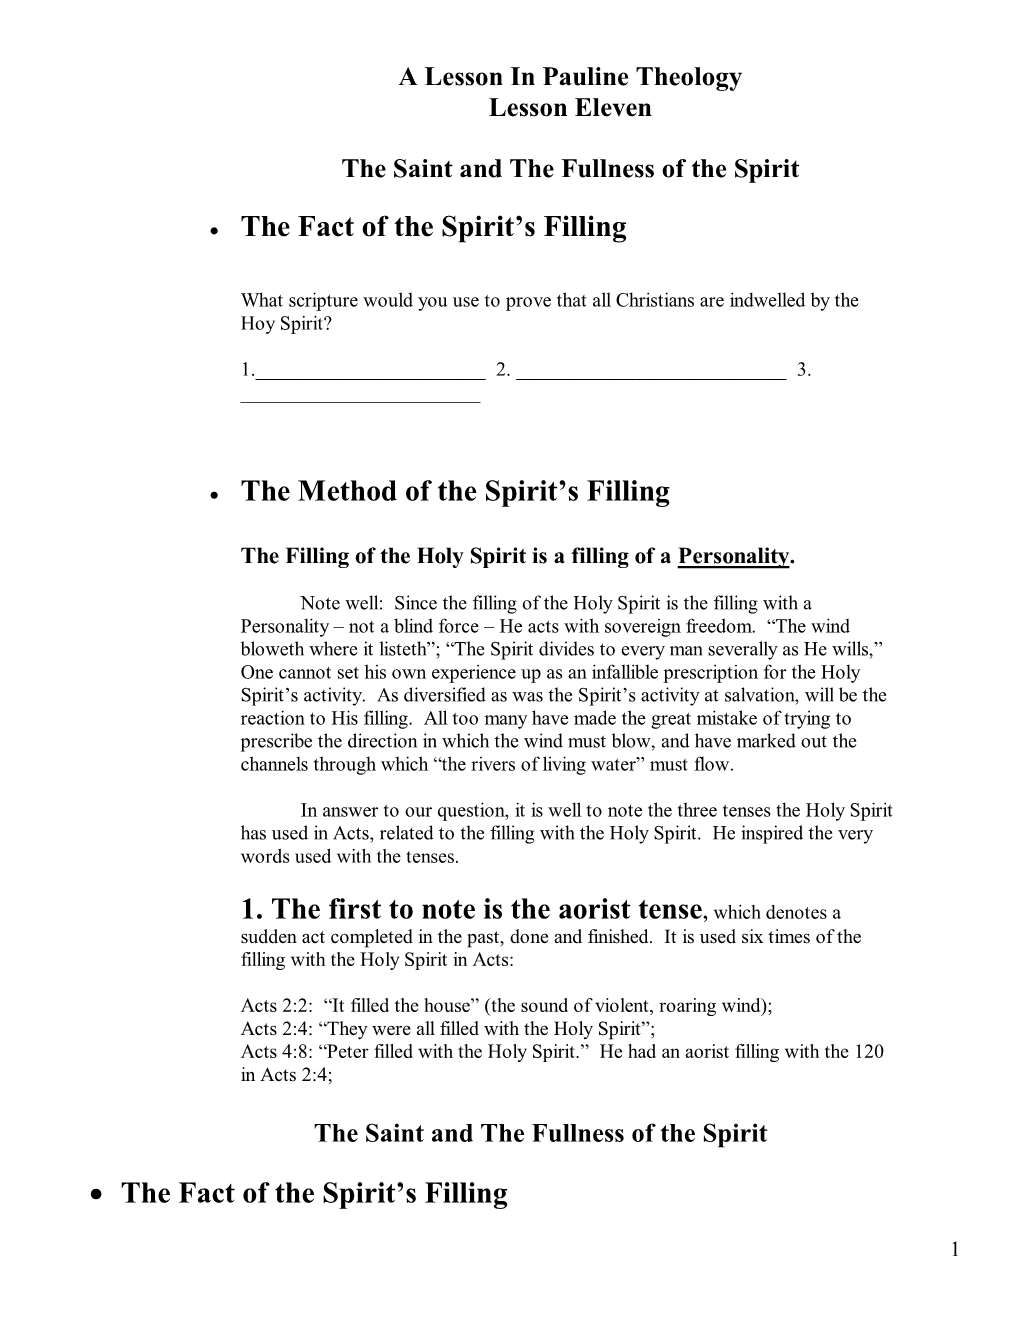 The Saint and the Fullness of the Spirit